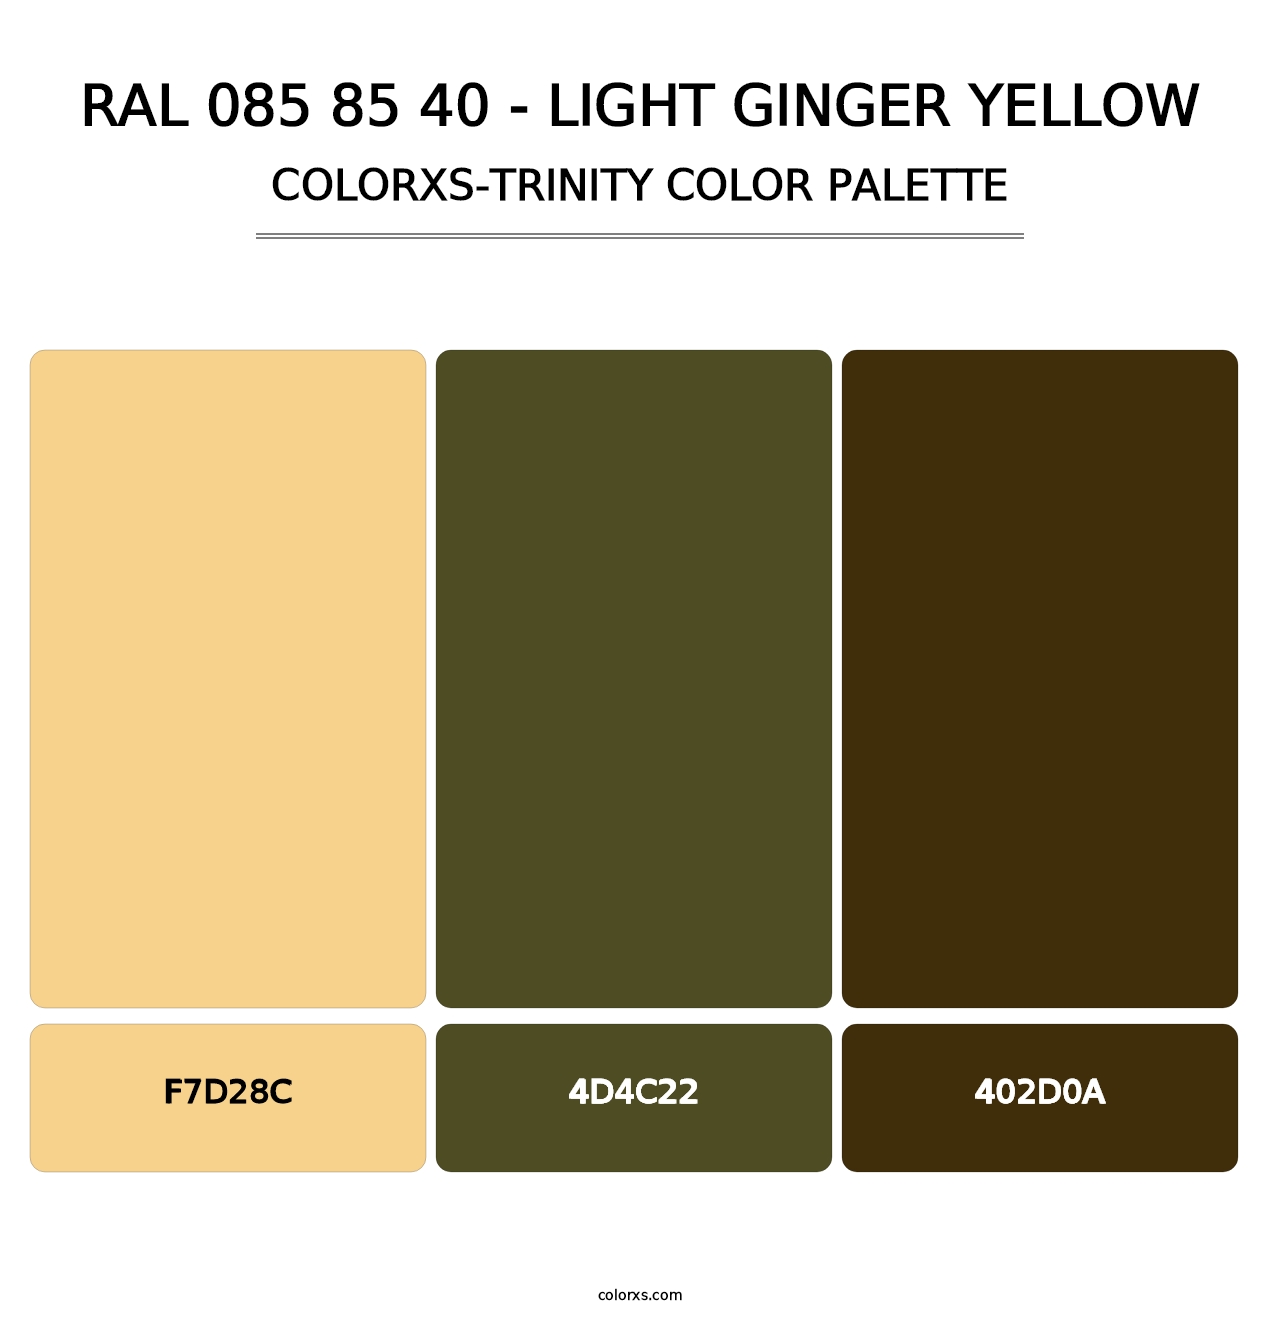 RAL 085 85 40 - Light Ginger Yellow - Colorxs Trinity Palette